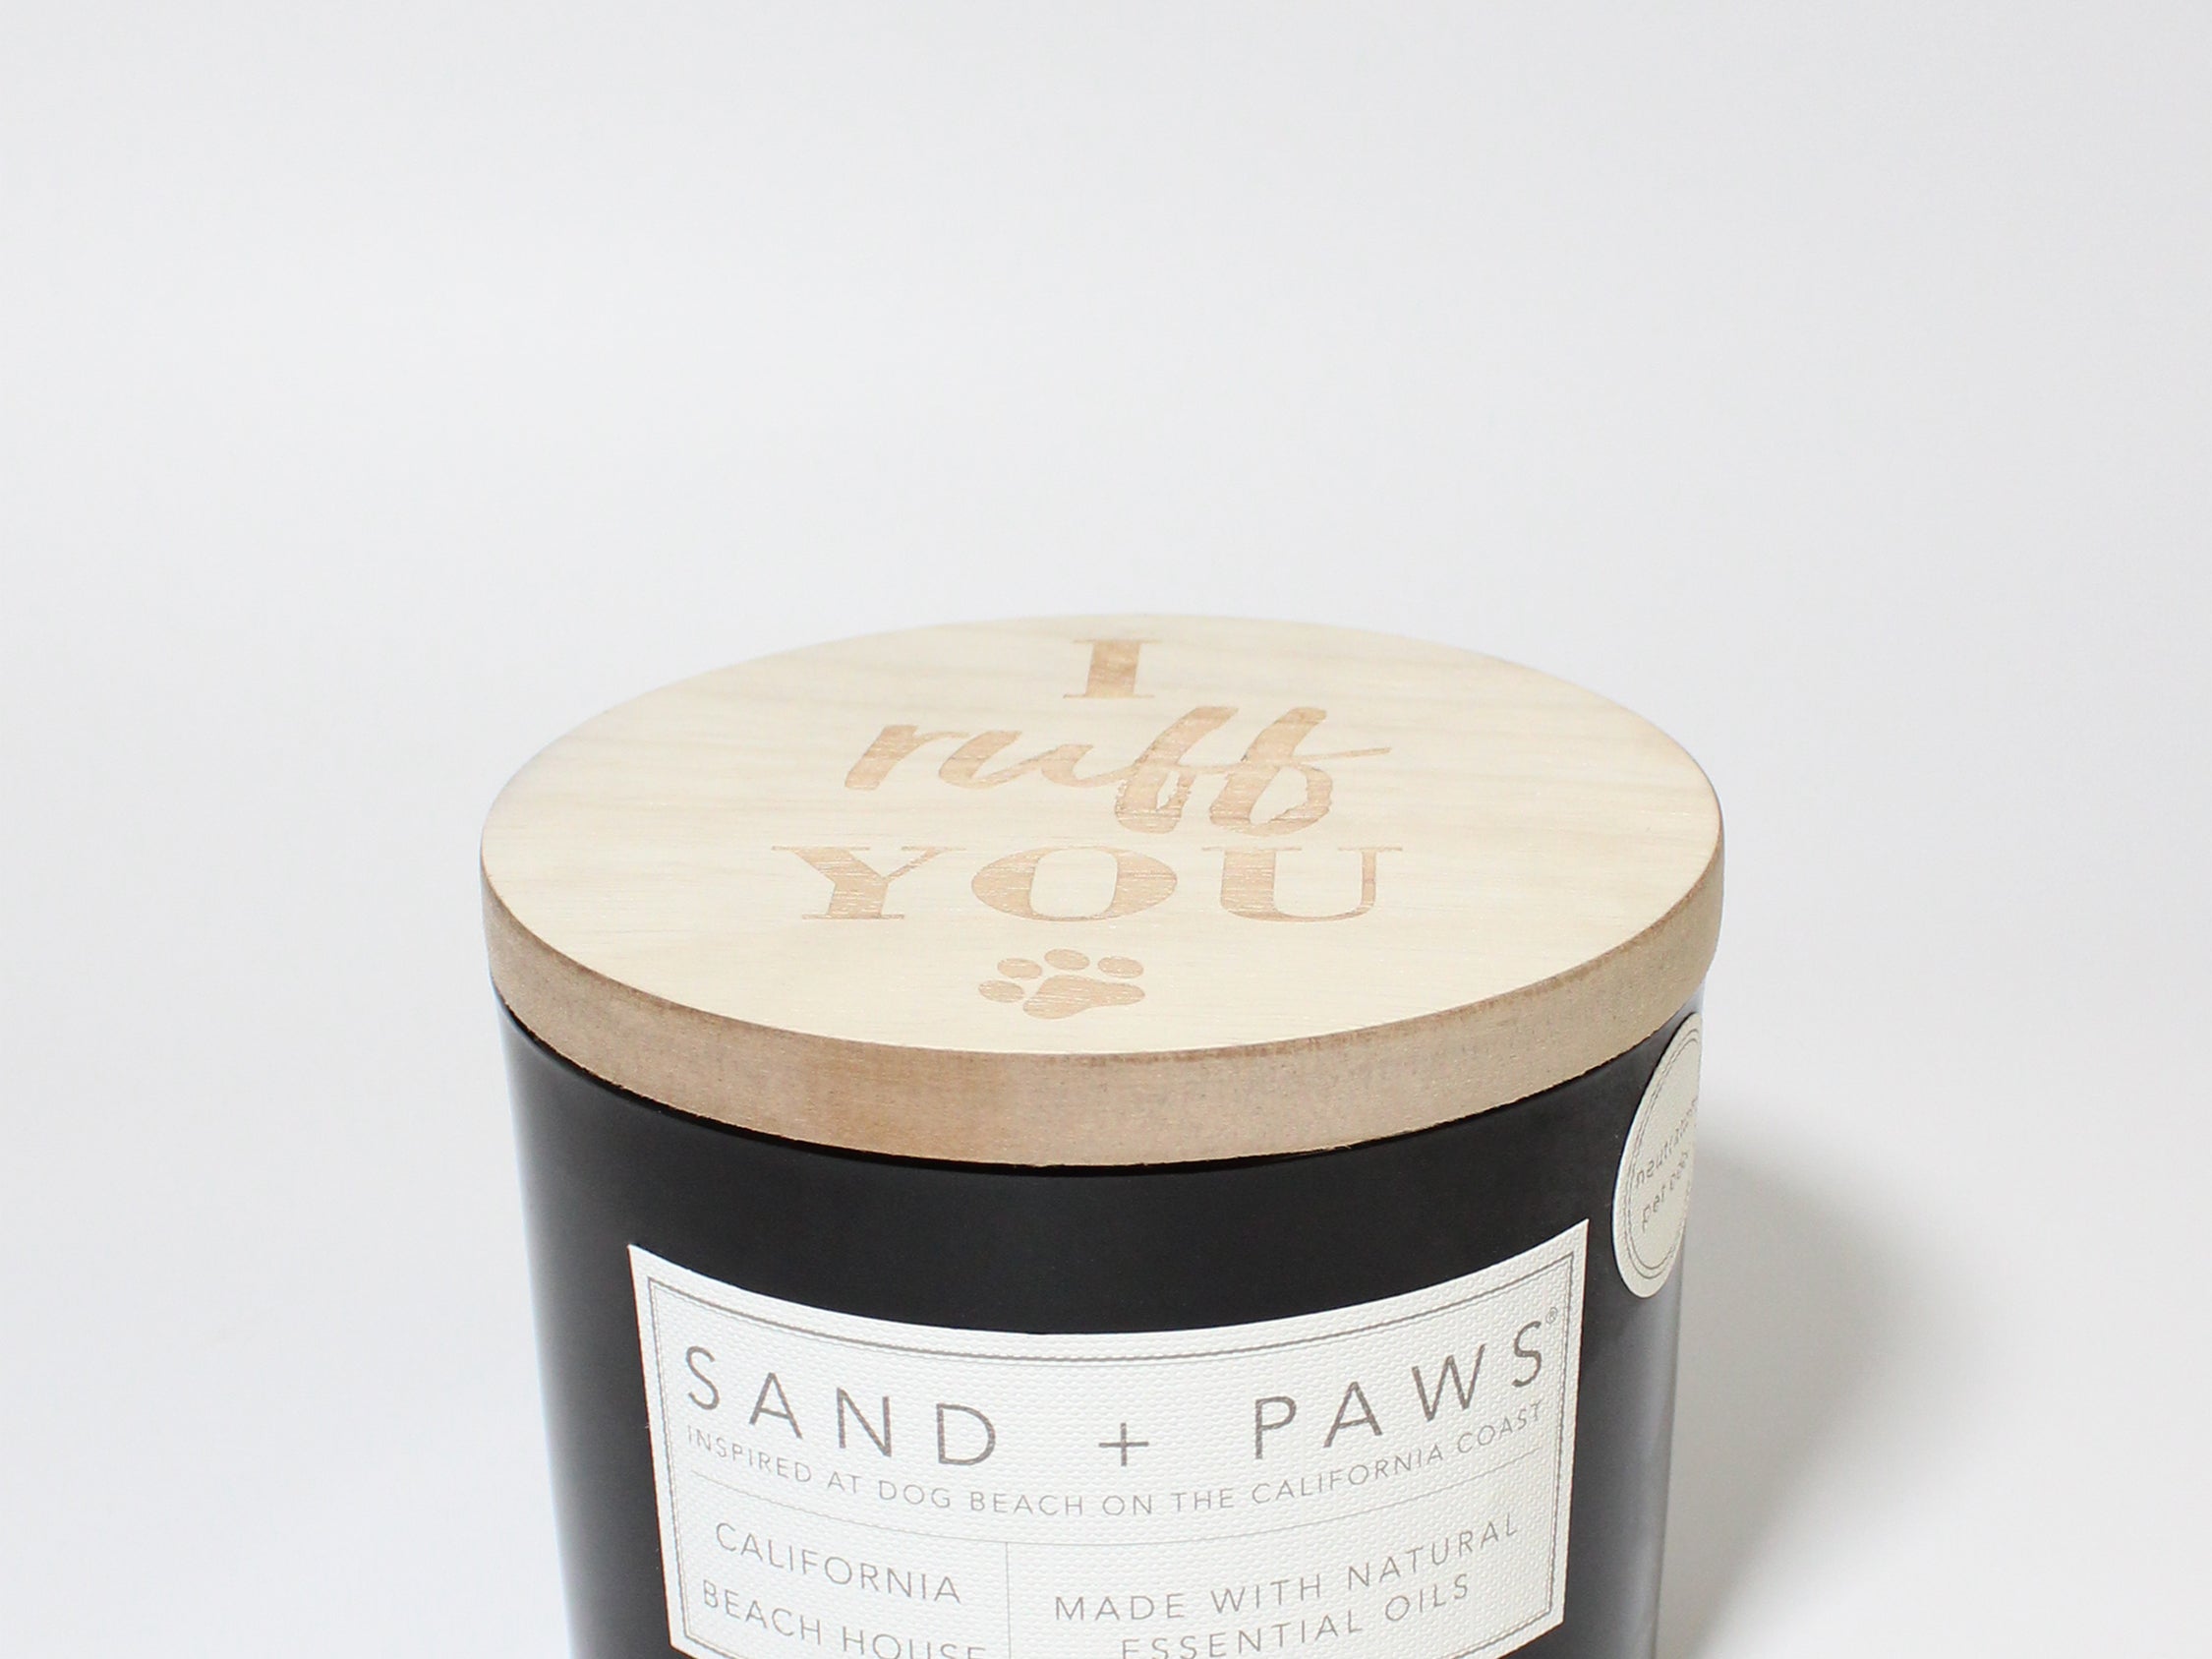 Sand + Paws California Beach House 12 oz scented candle Black vessel with I ruff you lid